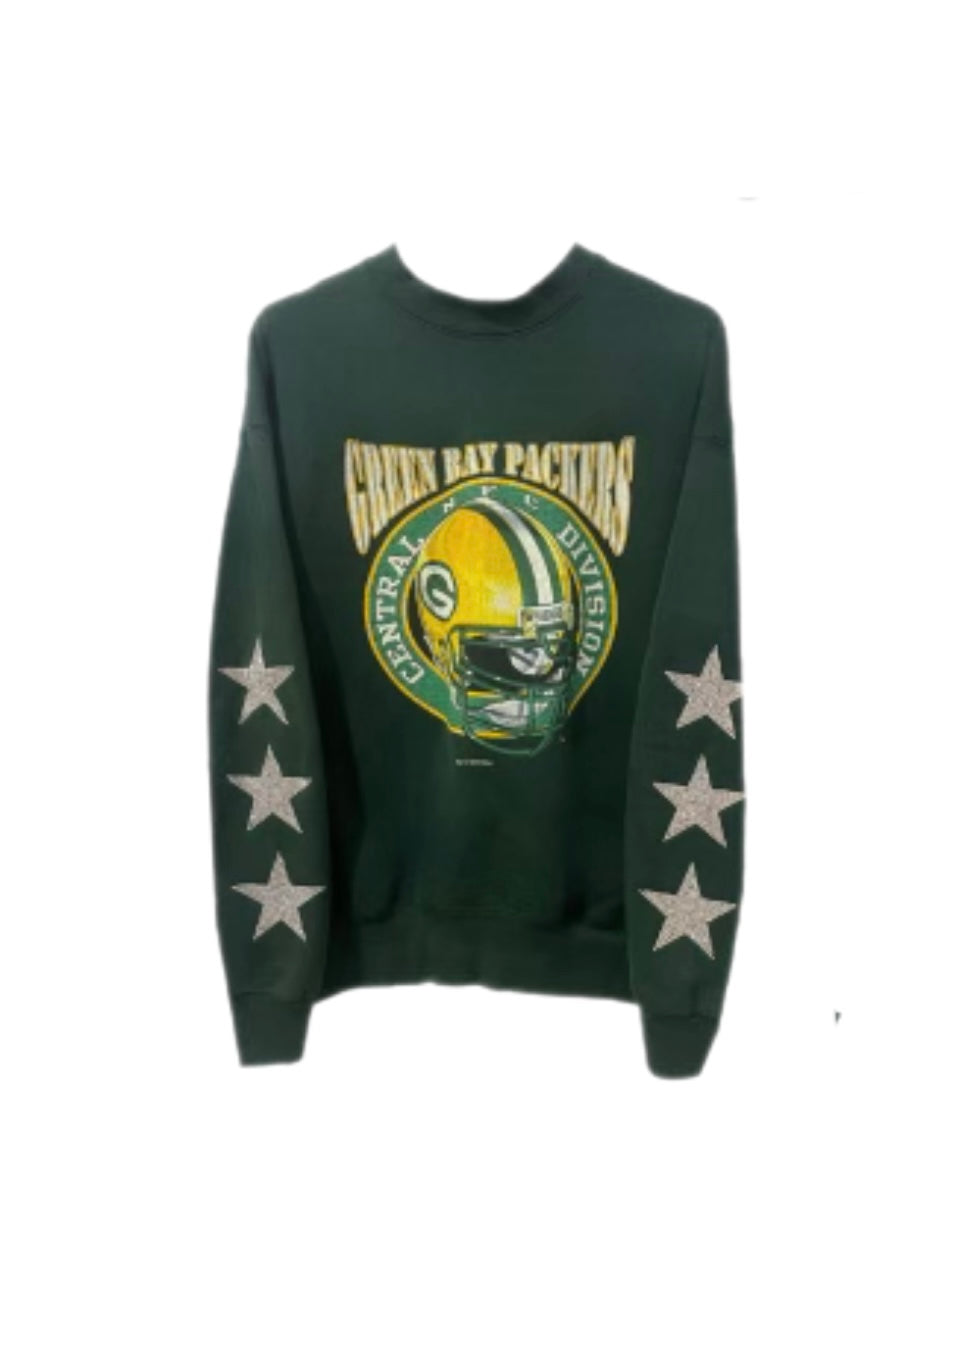 Green Bay Packers, Football One of a KIND Vintage Sweatshirt with Three Crystal Star Design